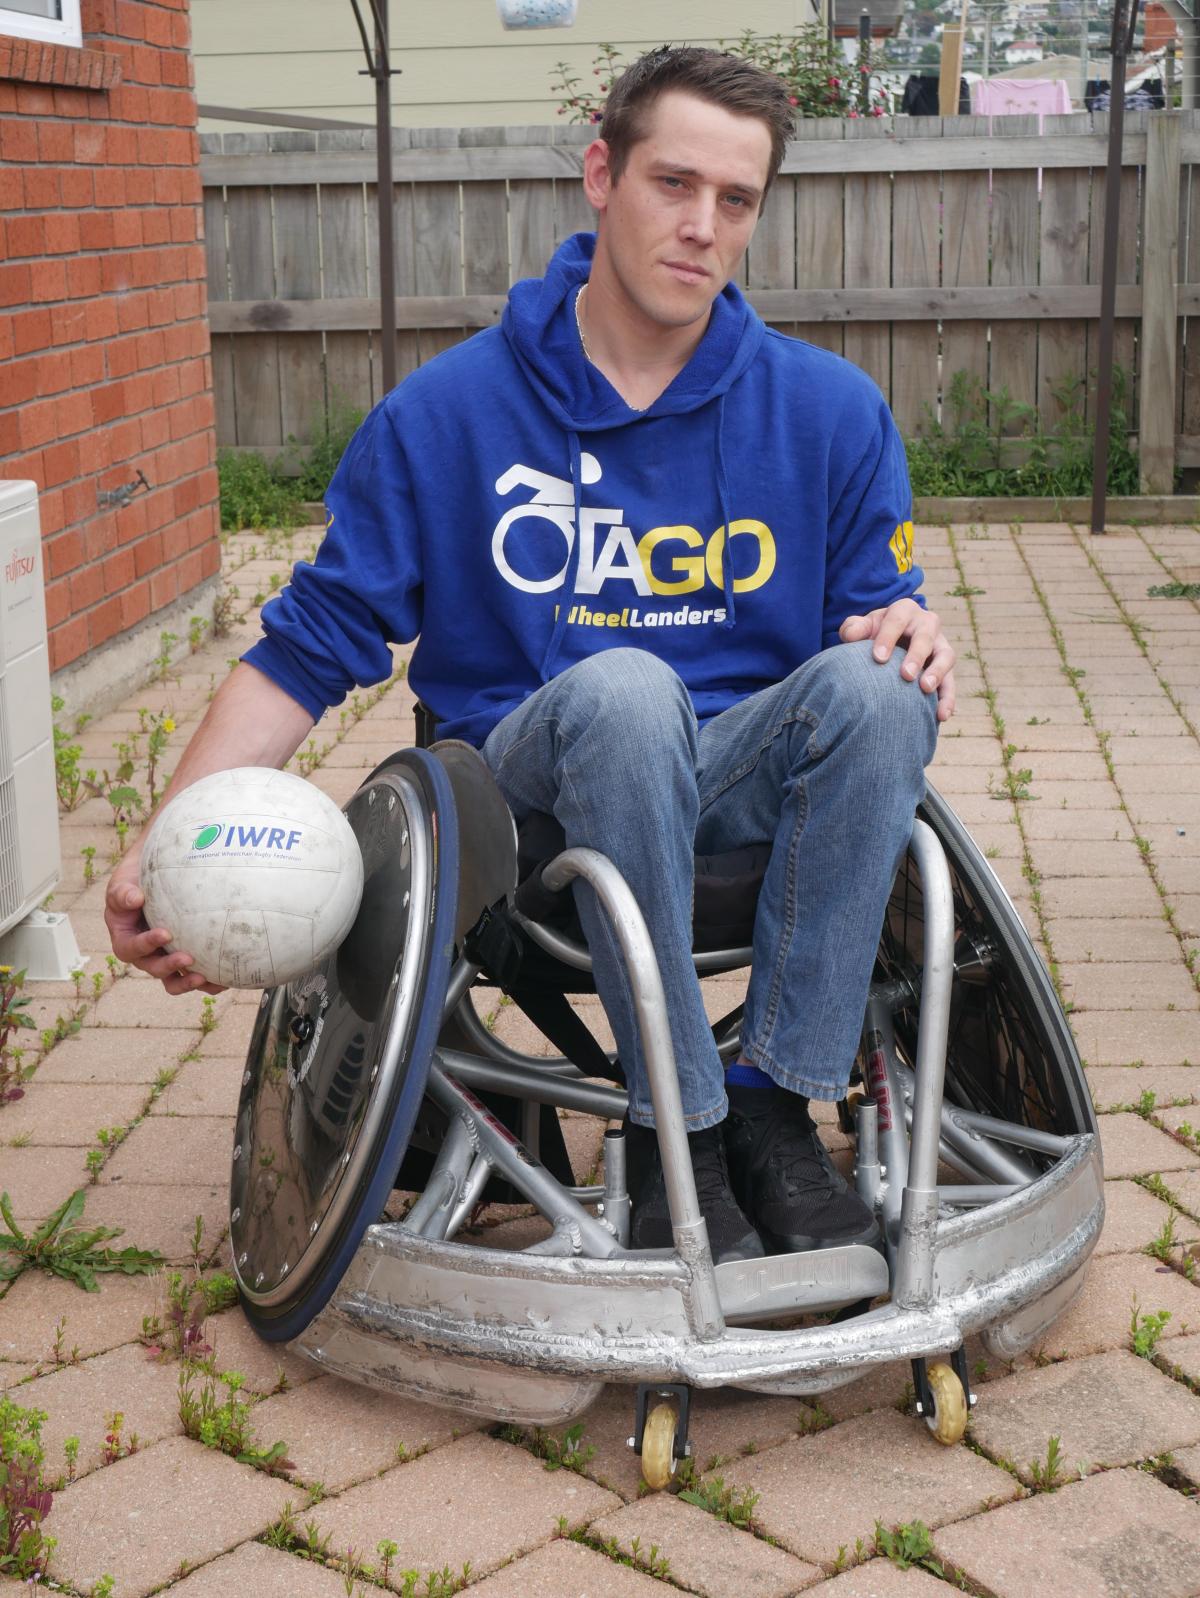 Wheelchair rugby player aims for national team | Otago Daily Times Online News